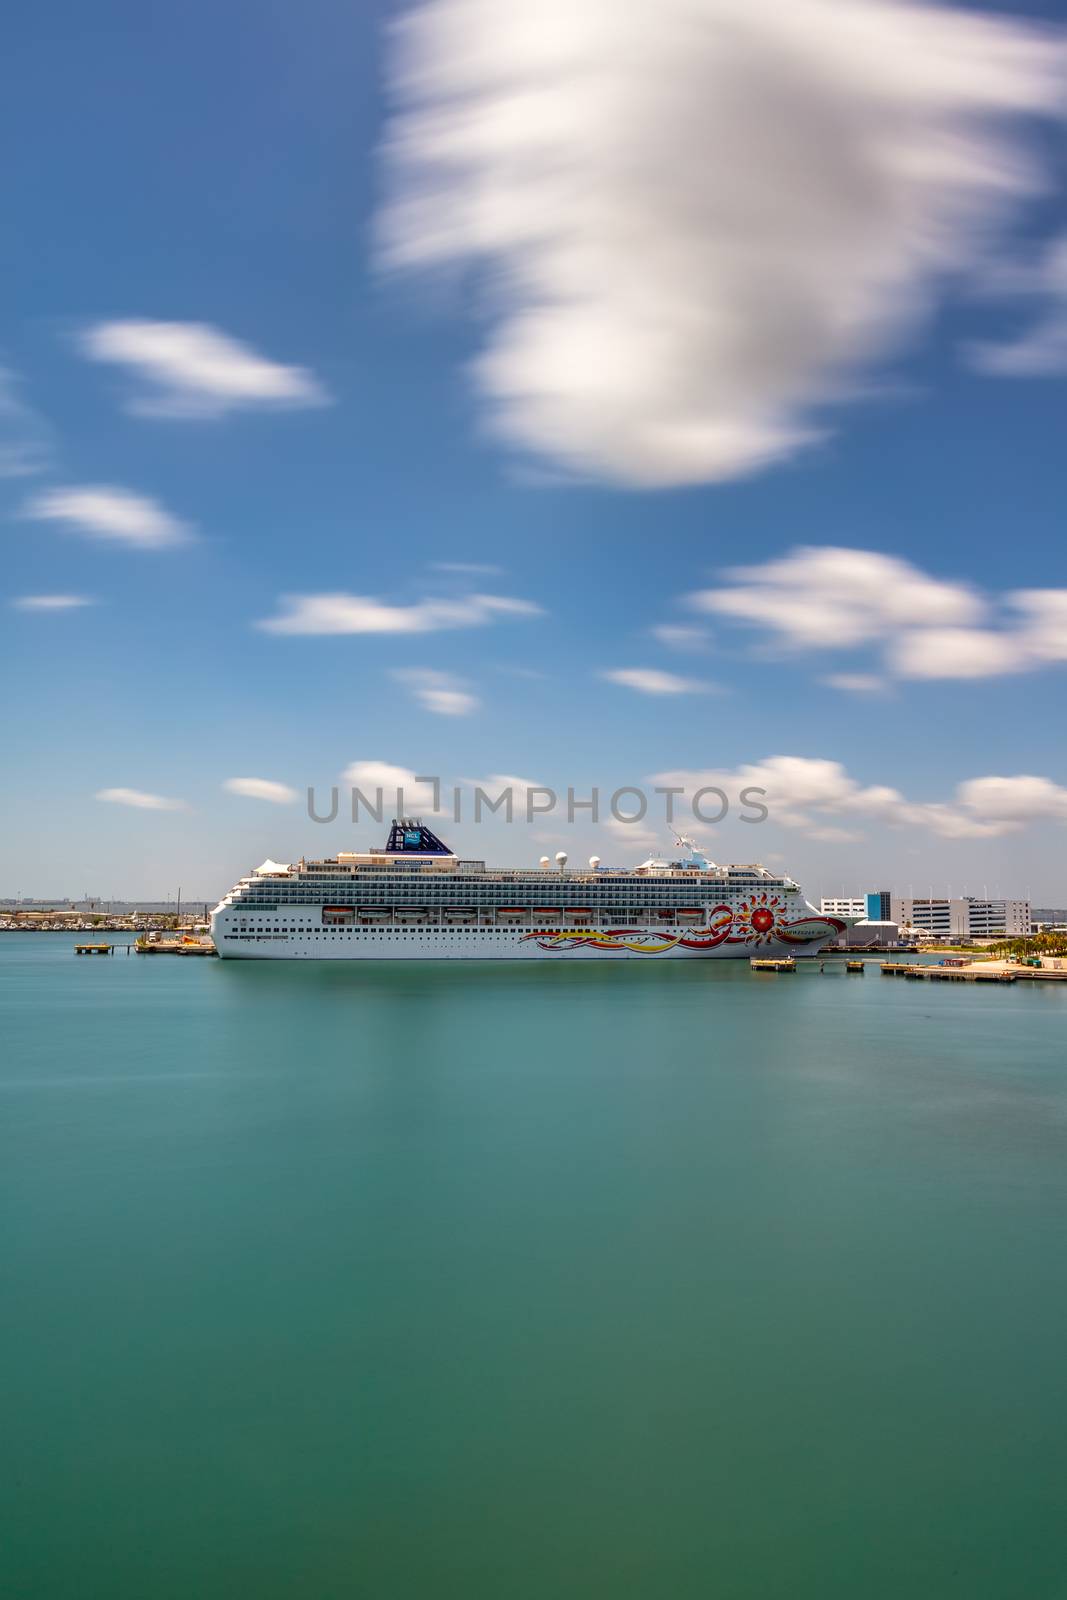 Norwegian Sun docked in Port Canaveral, FL, US by DamantisZ